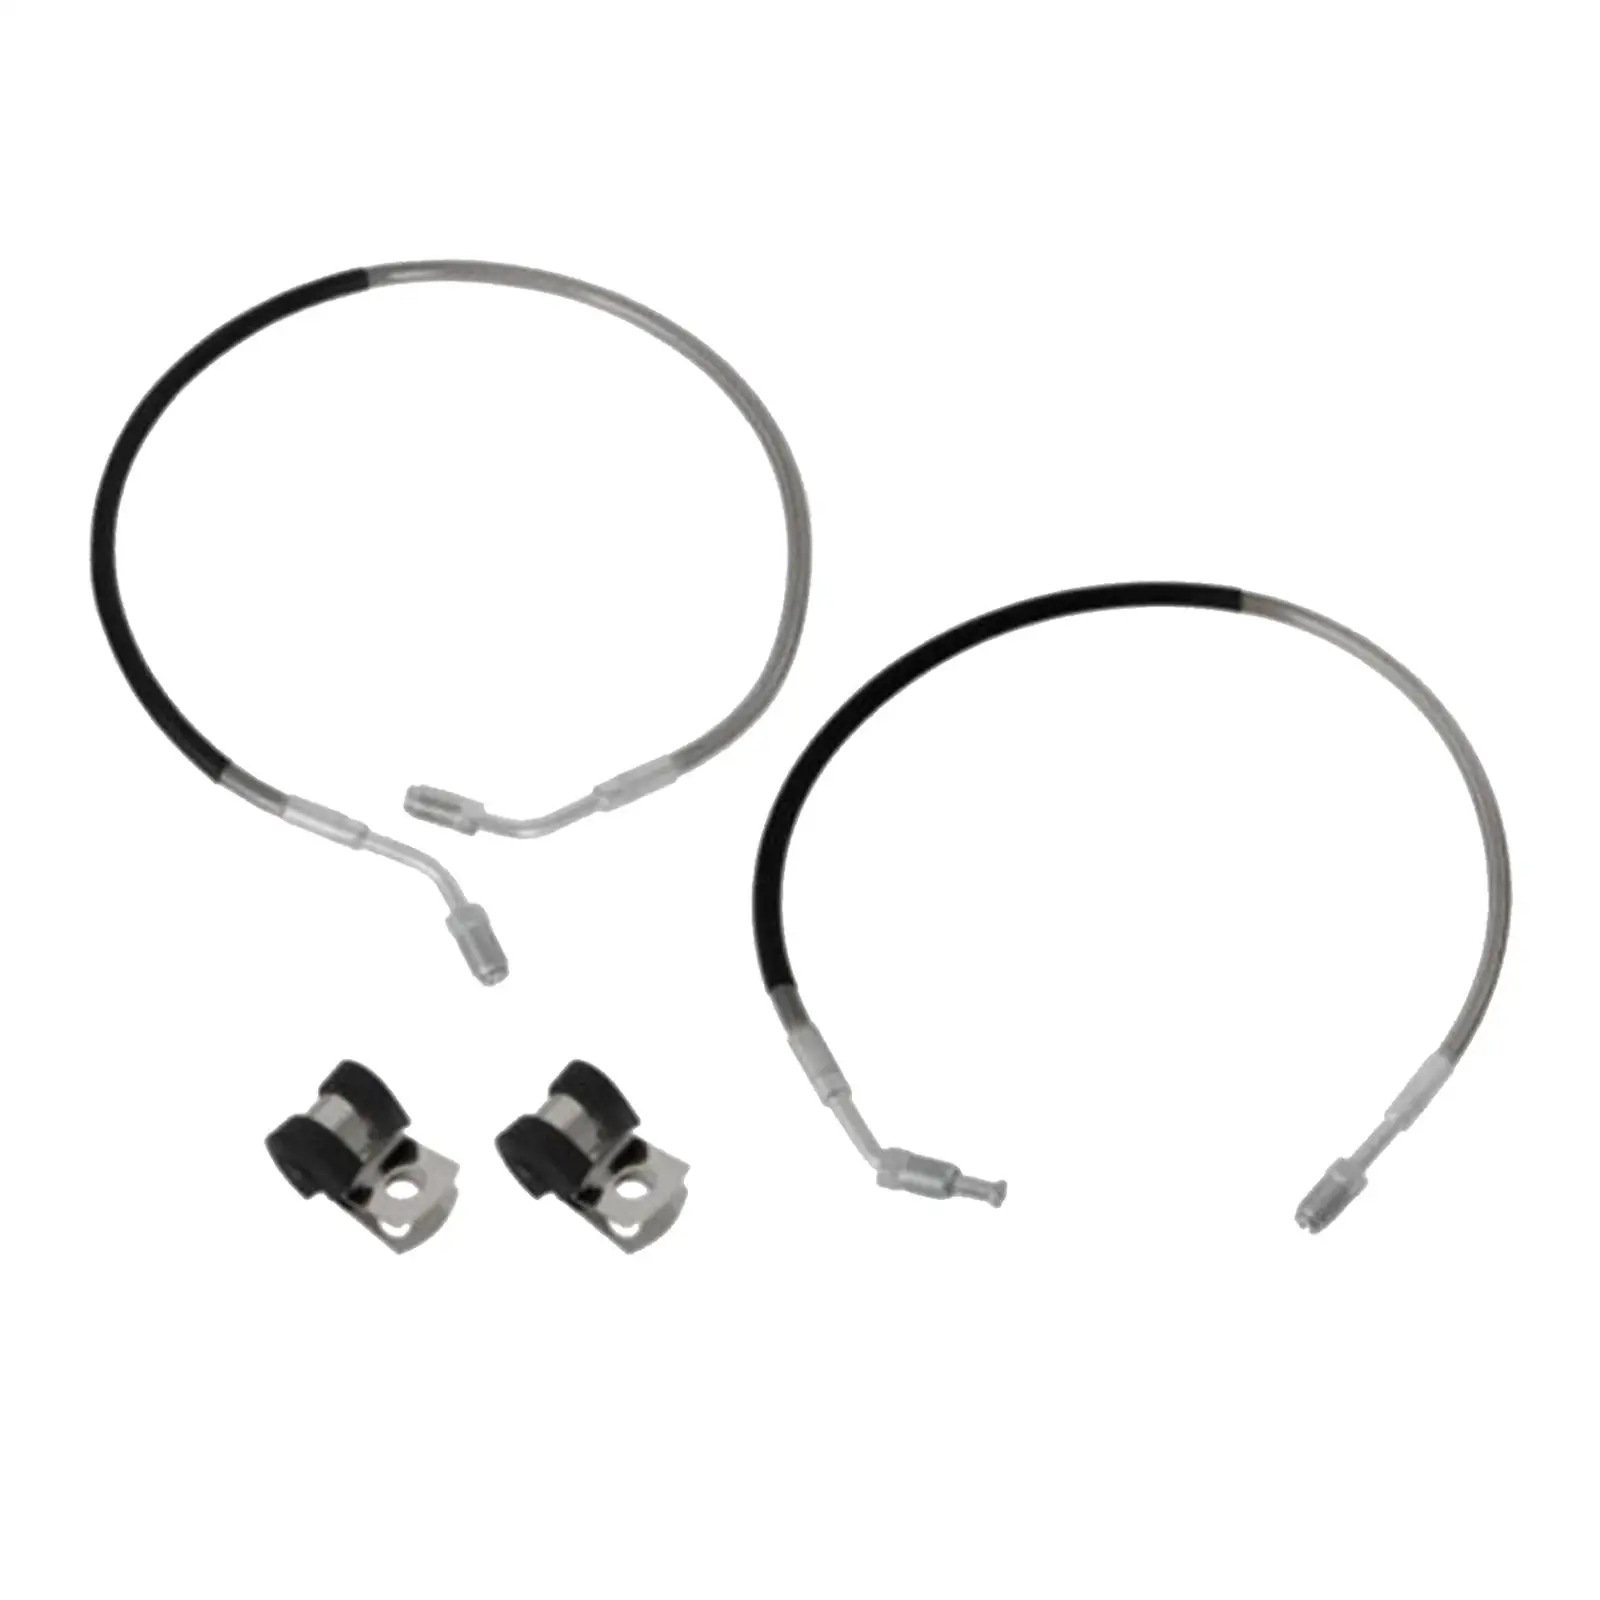 Front Left Right Brake Line 1930752 1930753 Accessories for Polaris ATV Xpress 300 400 Xpedition 325 425 Magnum 325 425 500